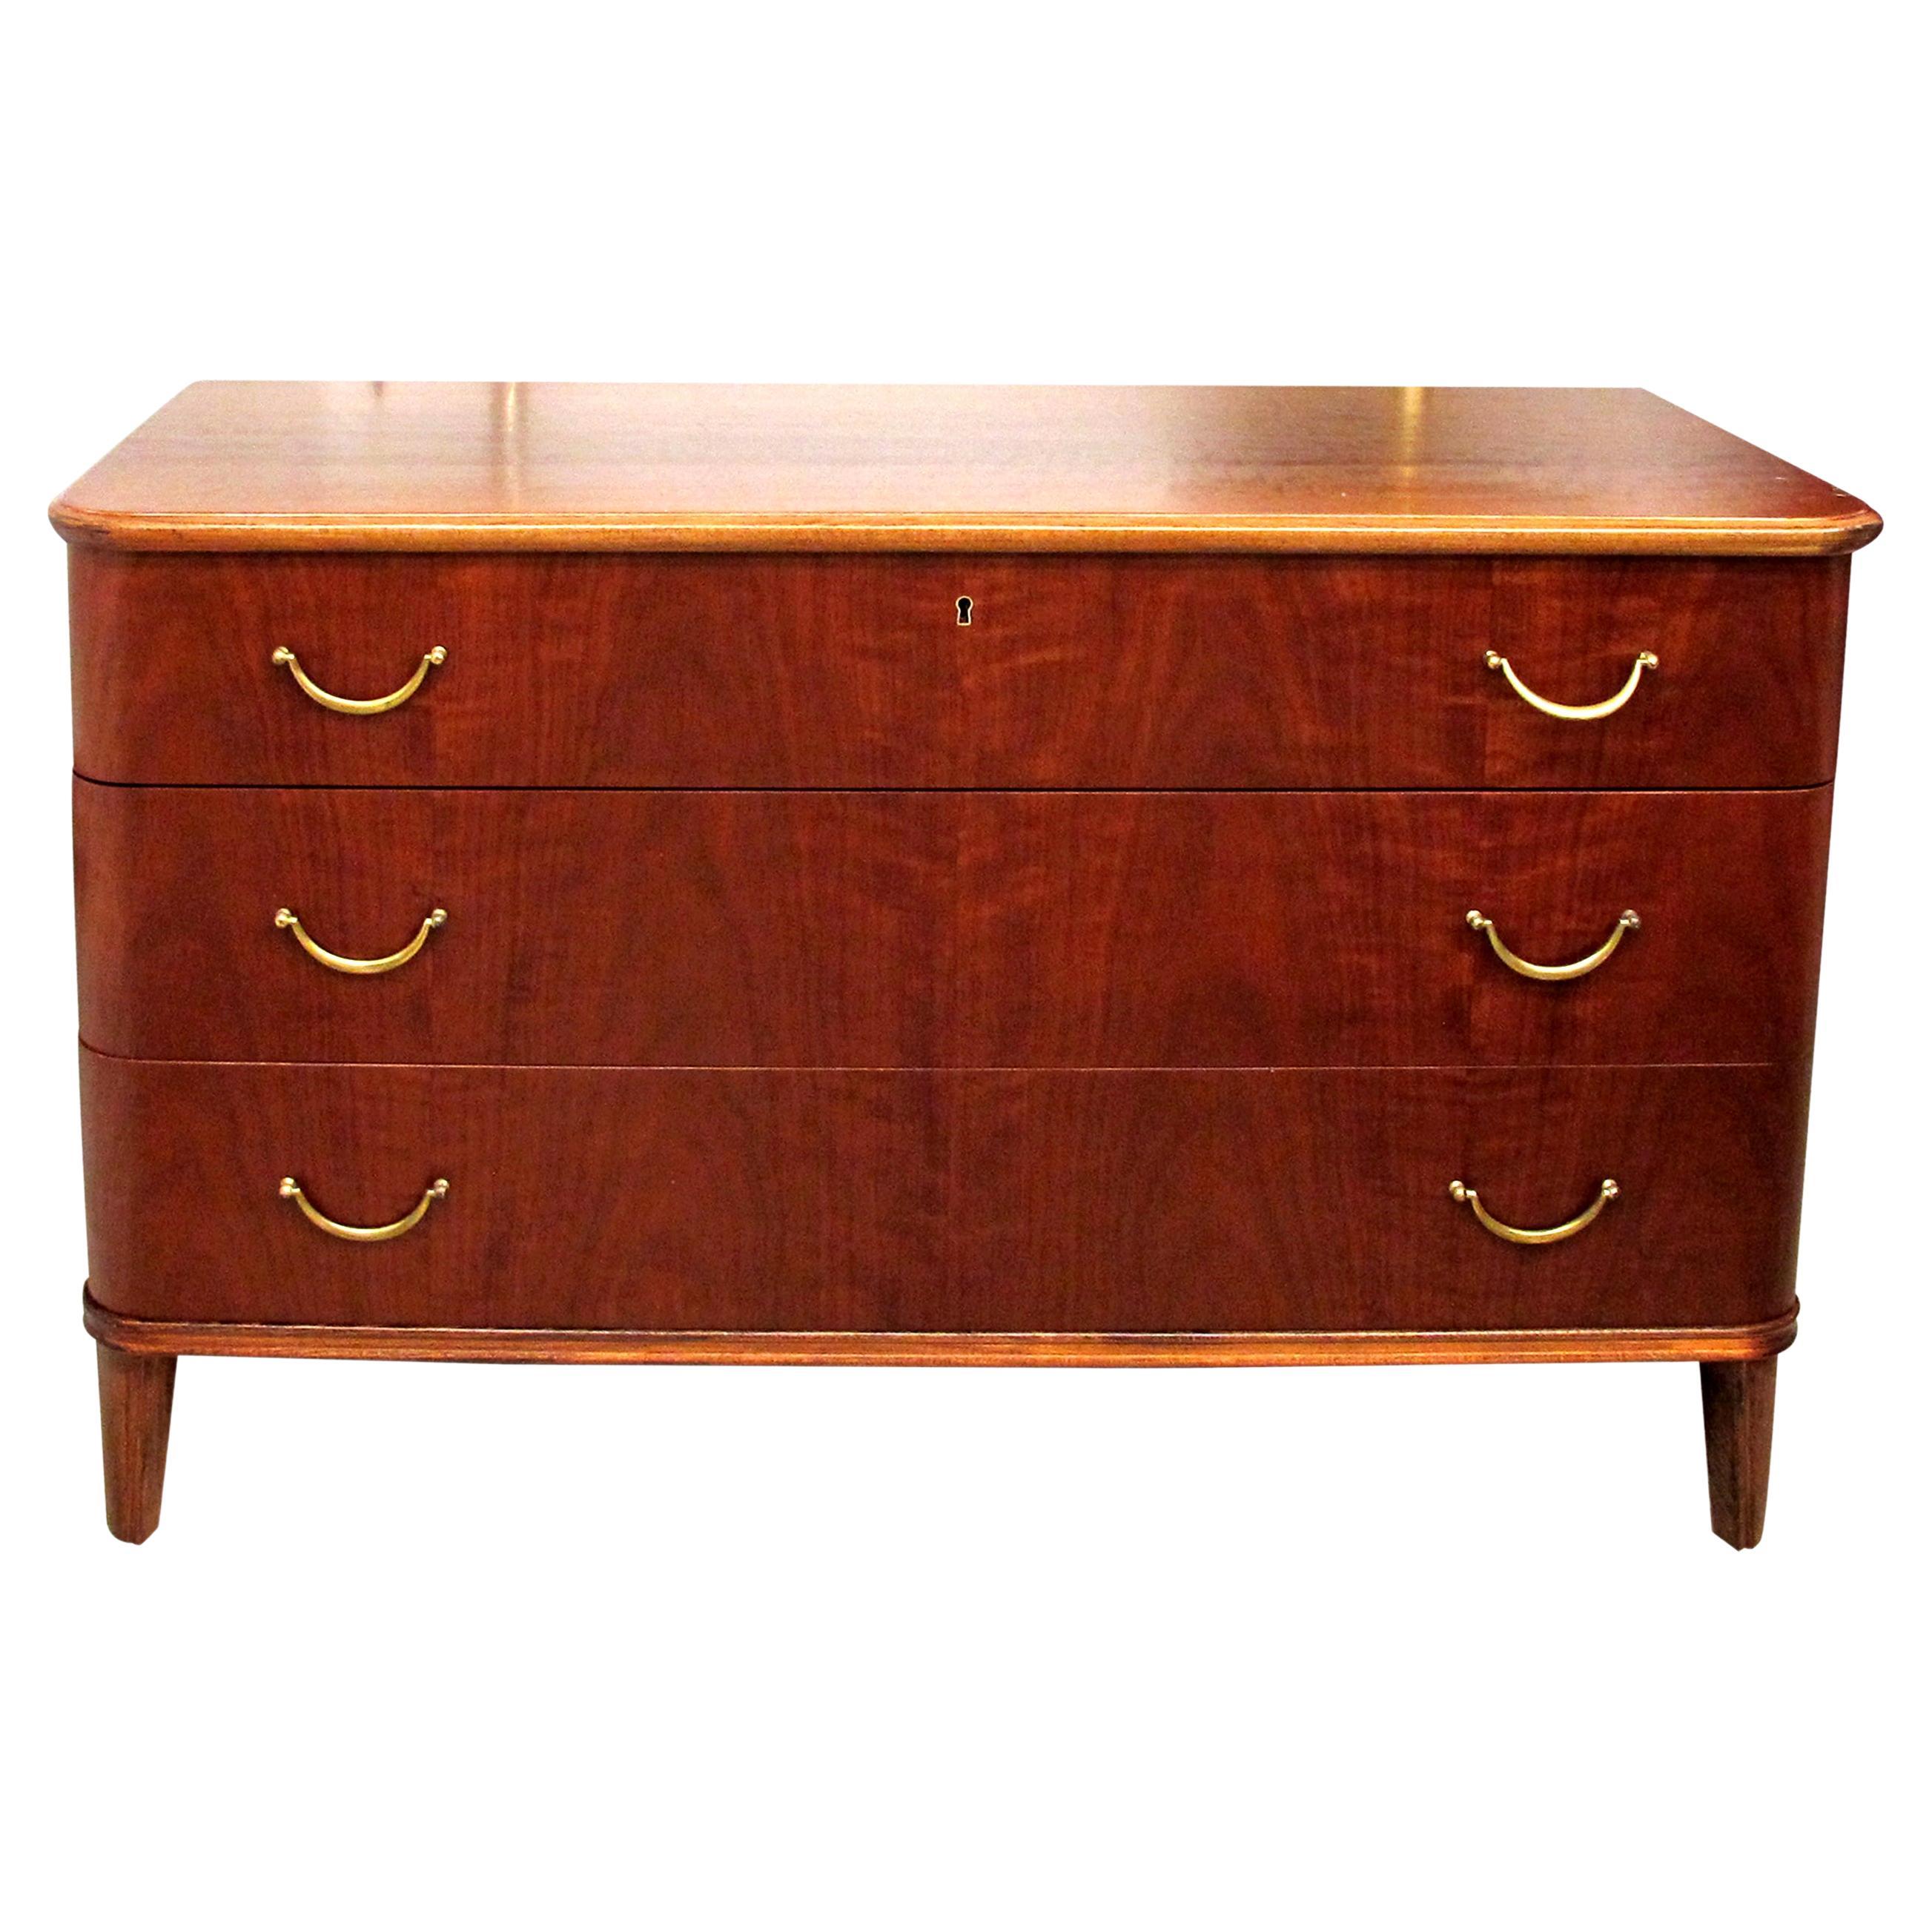 1940s Swedish Chest of Drawers with Walnut Veneers with Curved Edges For Sale